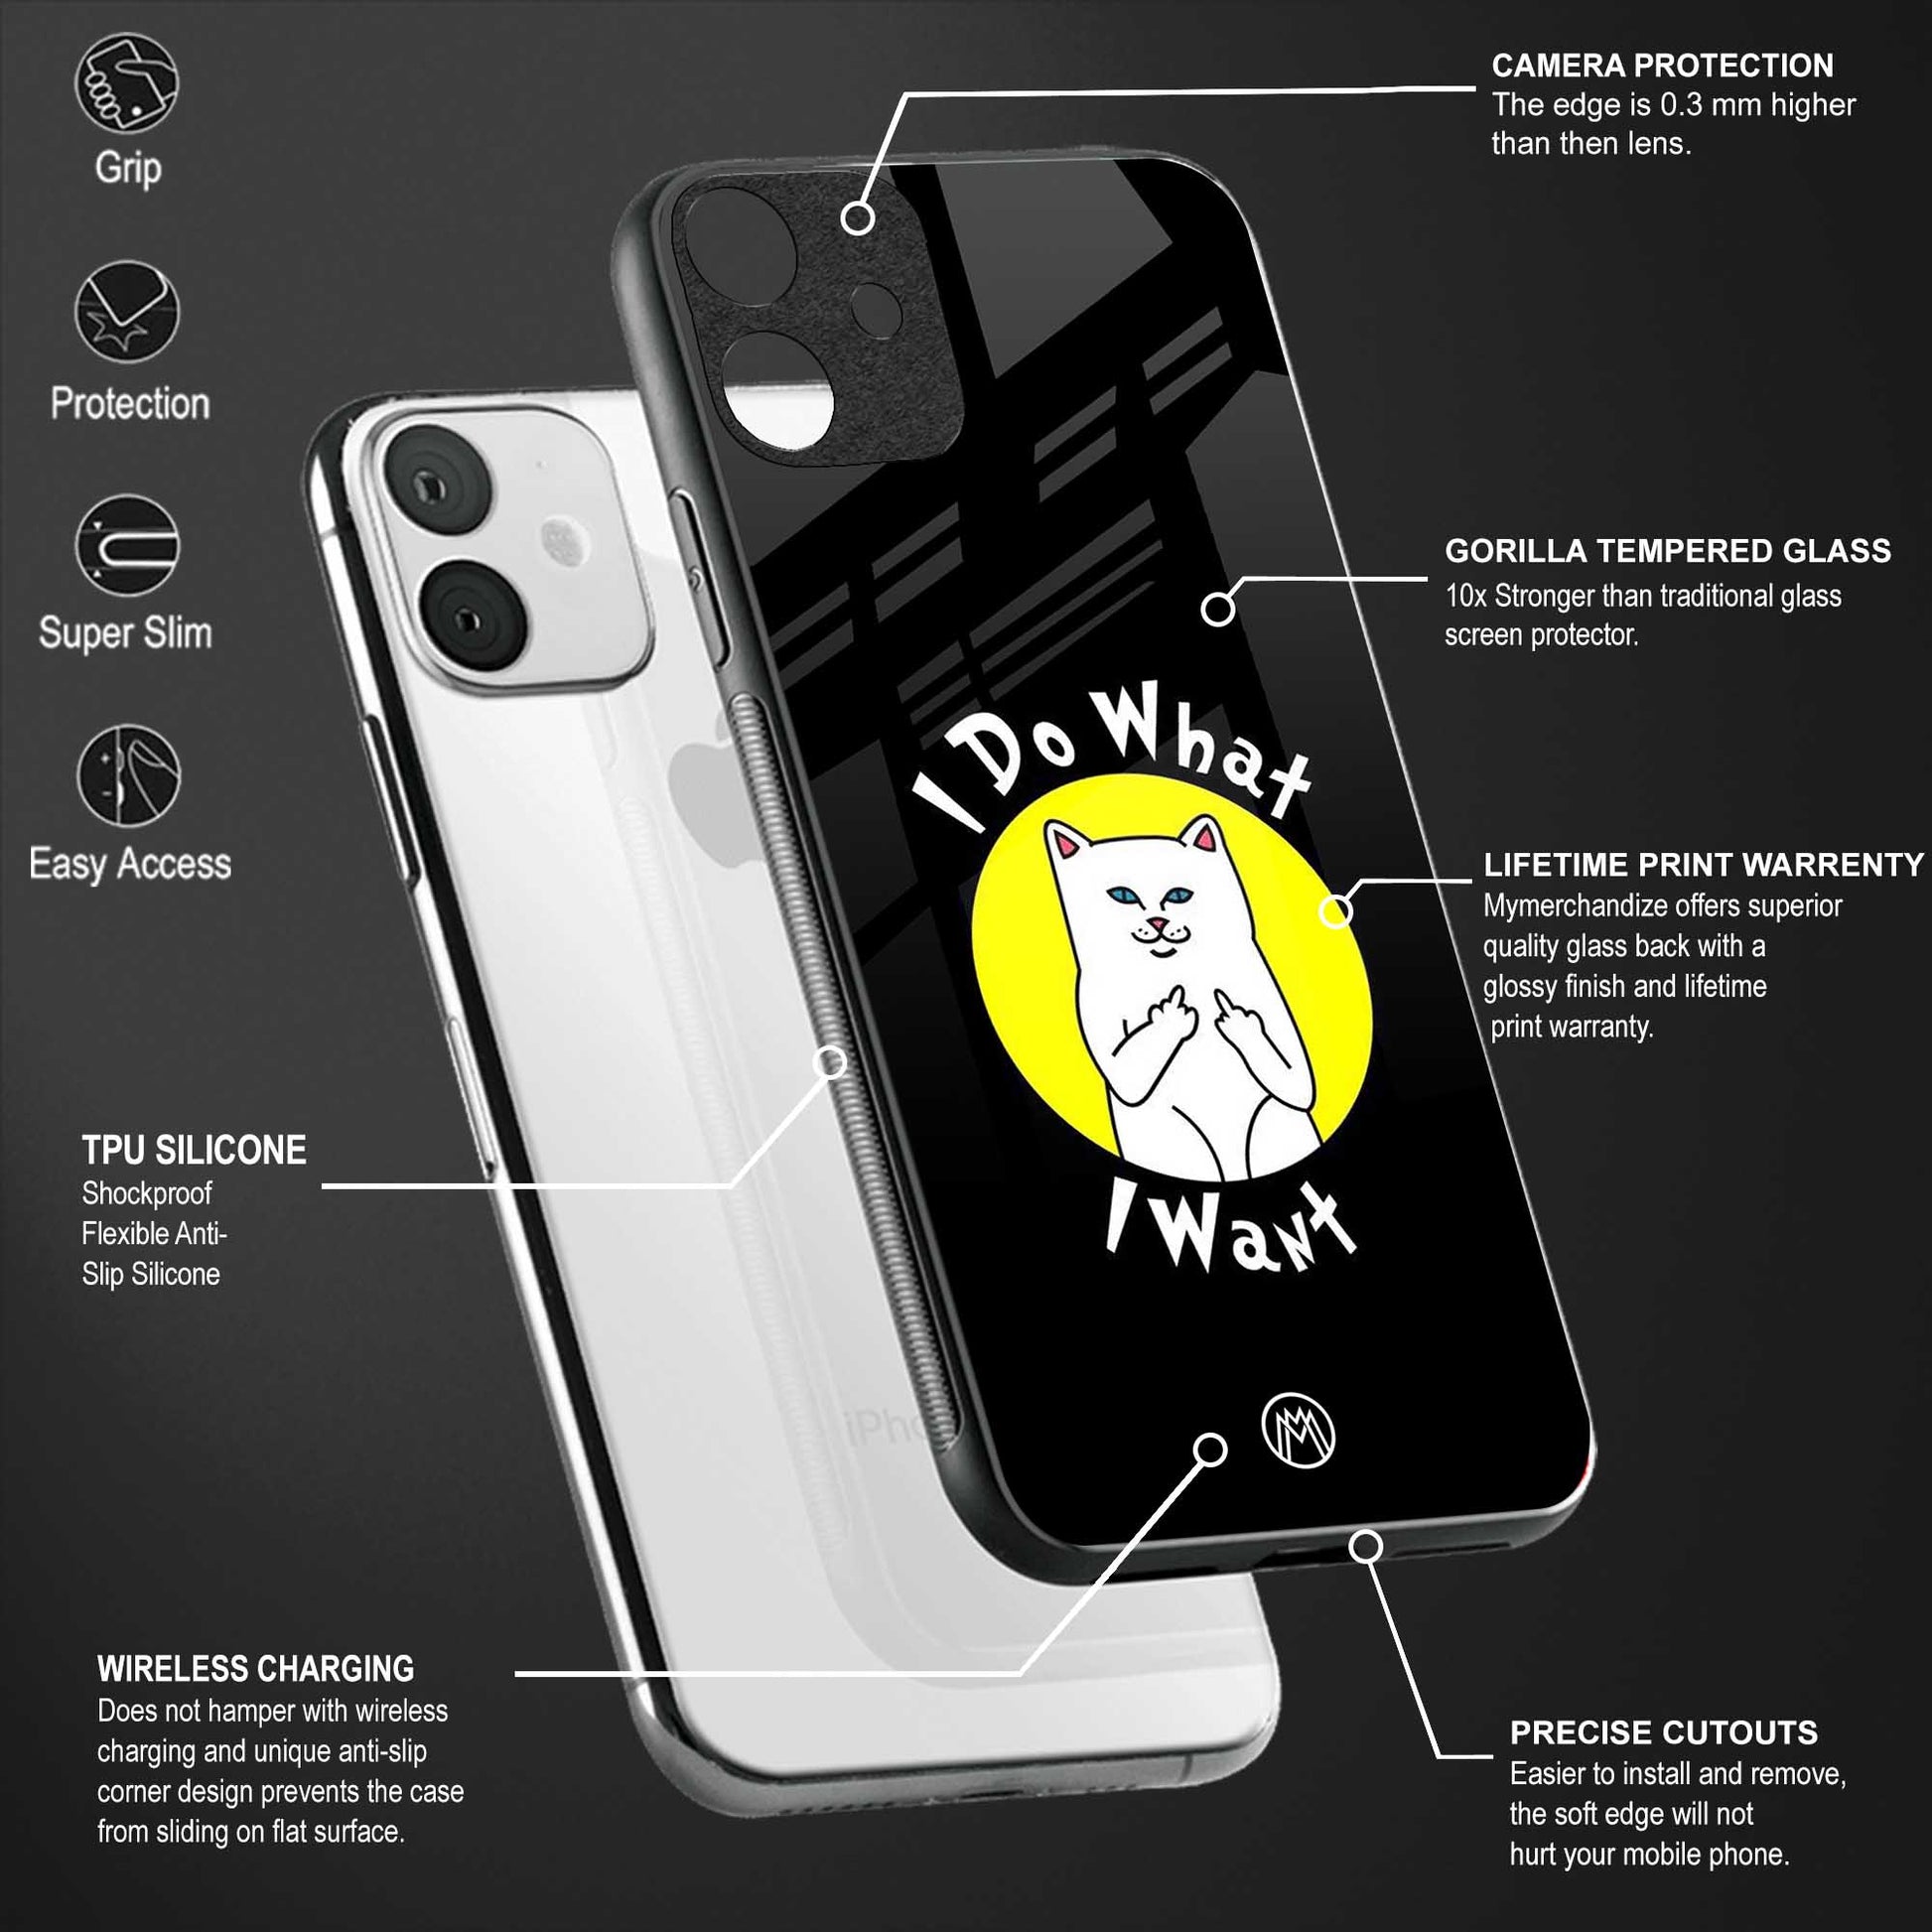 i do what i want glass case for samsung galaxy m52 5g